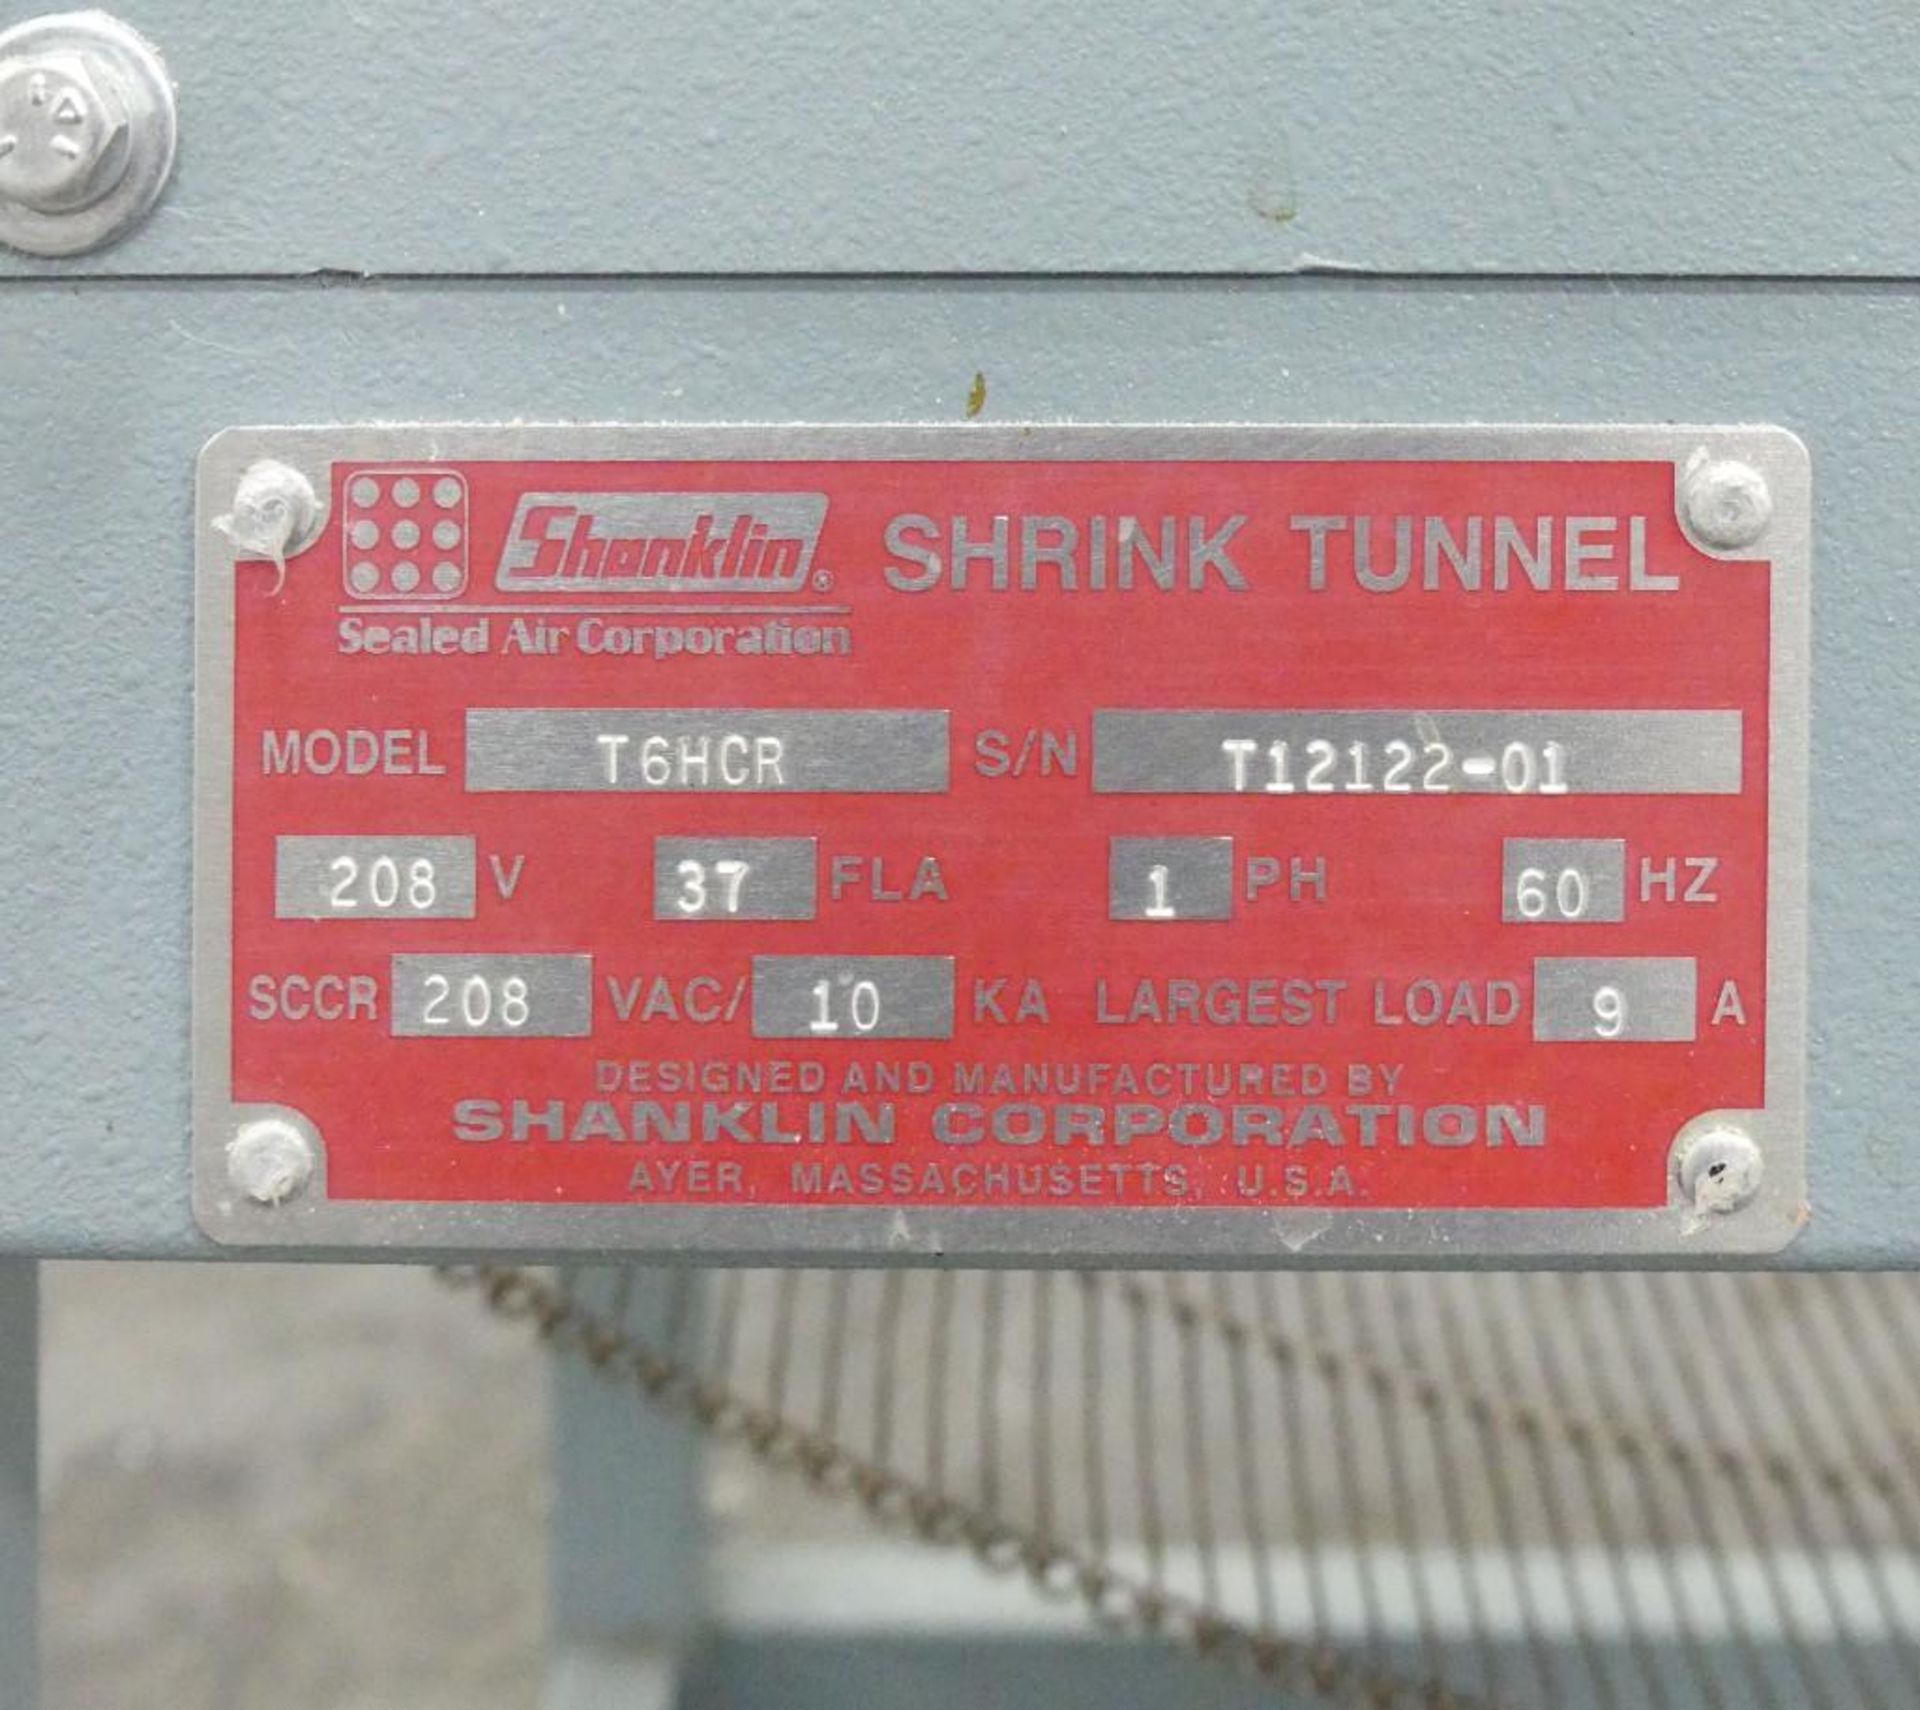 Shanklin T6HCR 10" Tall x 18" Wide Heat Tunnel - Image 9 of 9